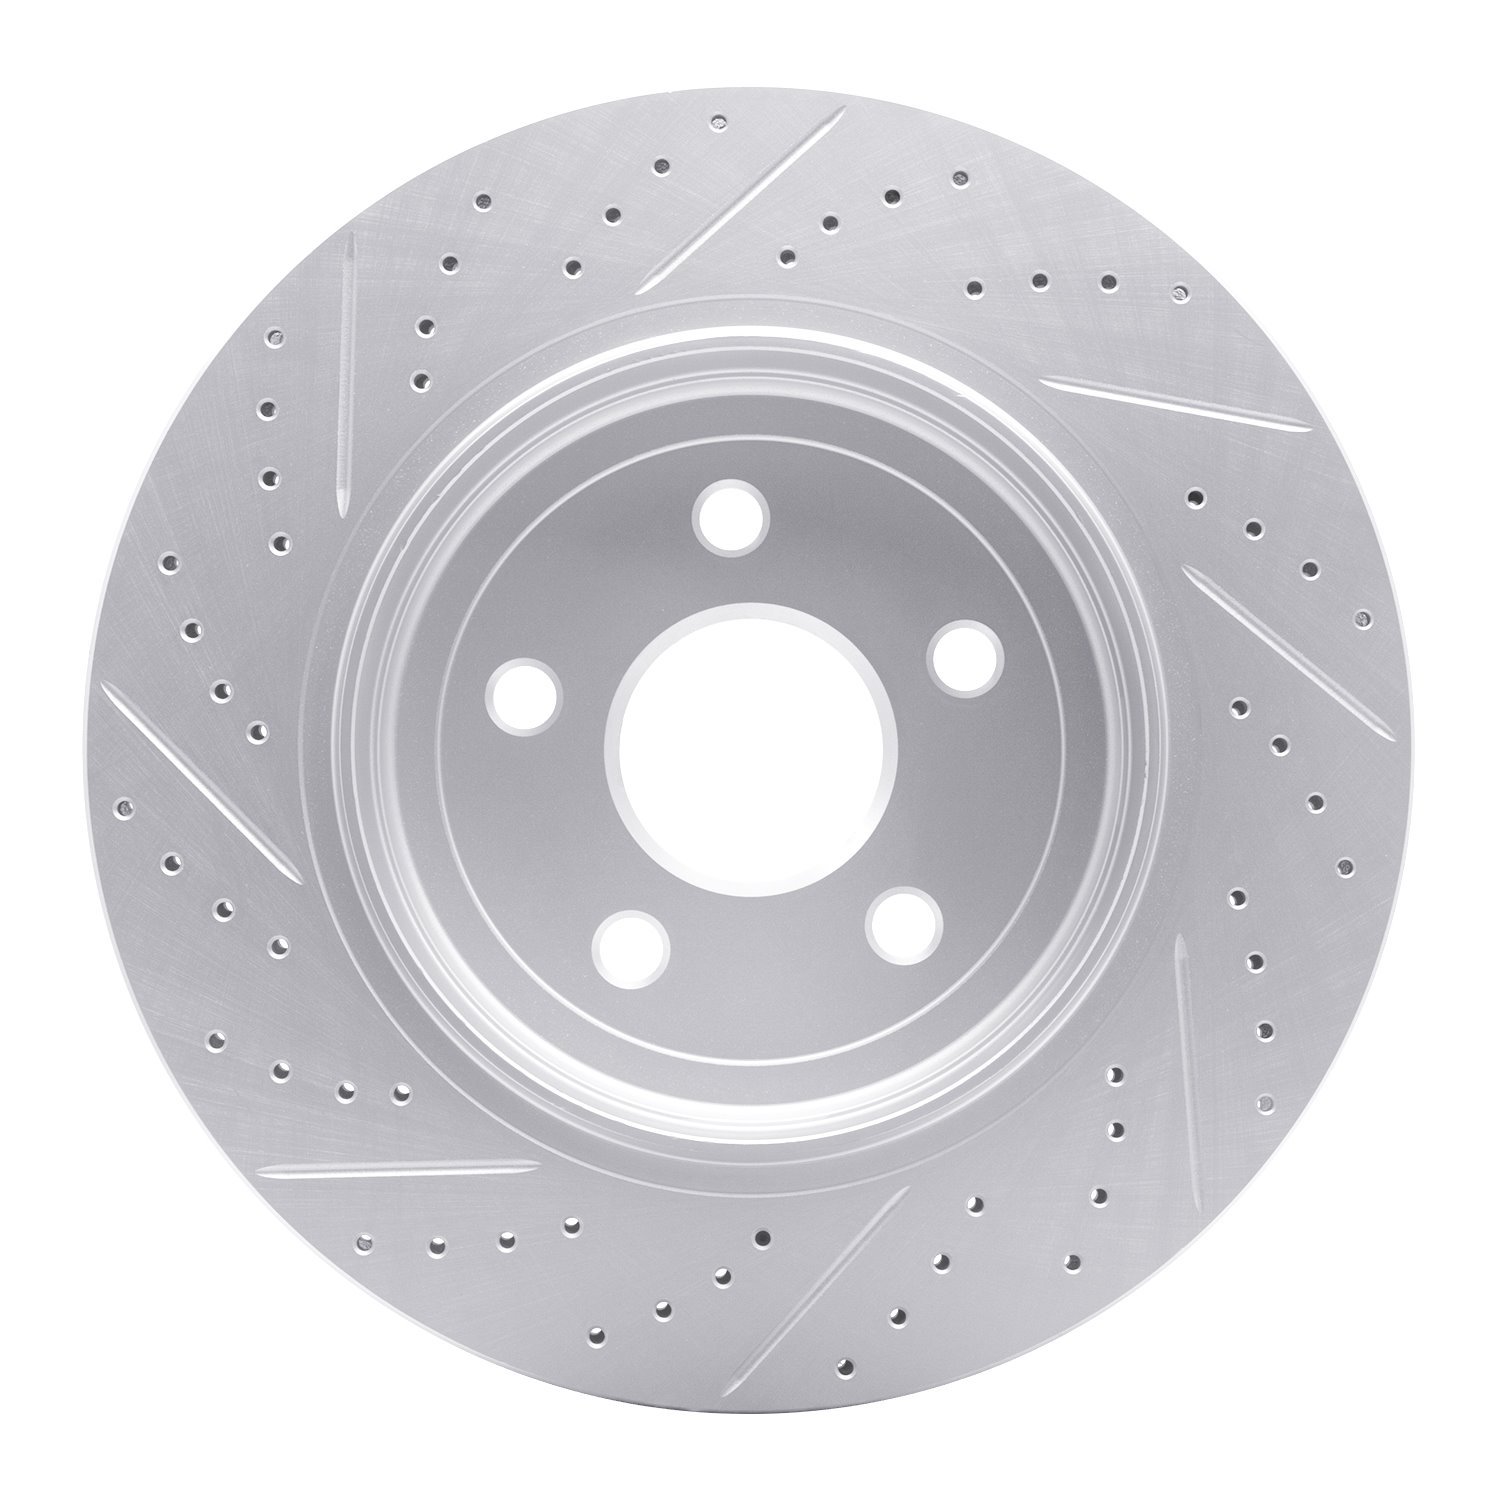 830-42008R Geoperformance Drilled/Slotted Brake Rotor, Fits Select Mopar, Position: Rear Right